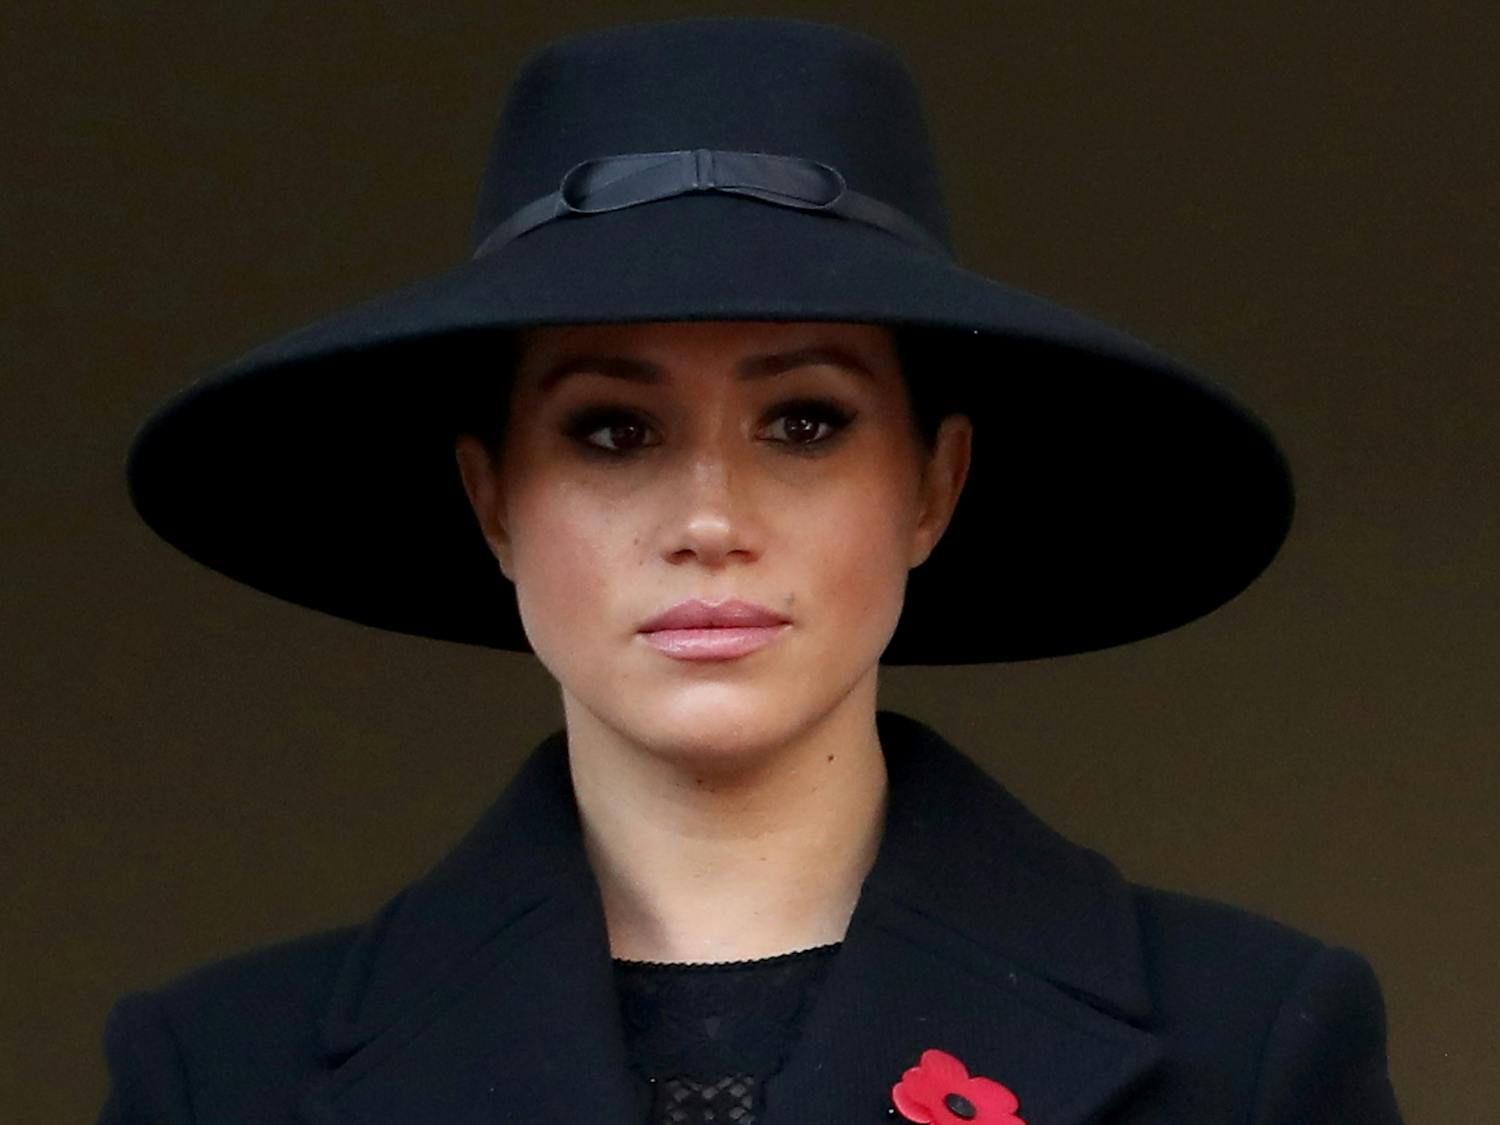 In this file photo, Meghan Markle, Duchess of Sussex attends the annual Remembrance Sunday memorial at The Cenotaph on Nov. 10, 2019 in London, England. Markle's friends in Hollywood are coming to her defense after bullying rumors surfaced. Photo courtesy of Chris Jackson/Getty Images/TNS